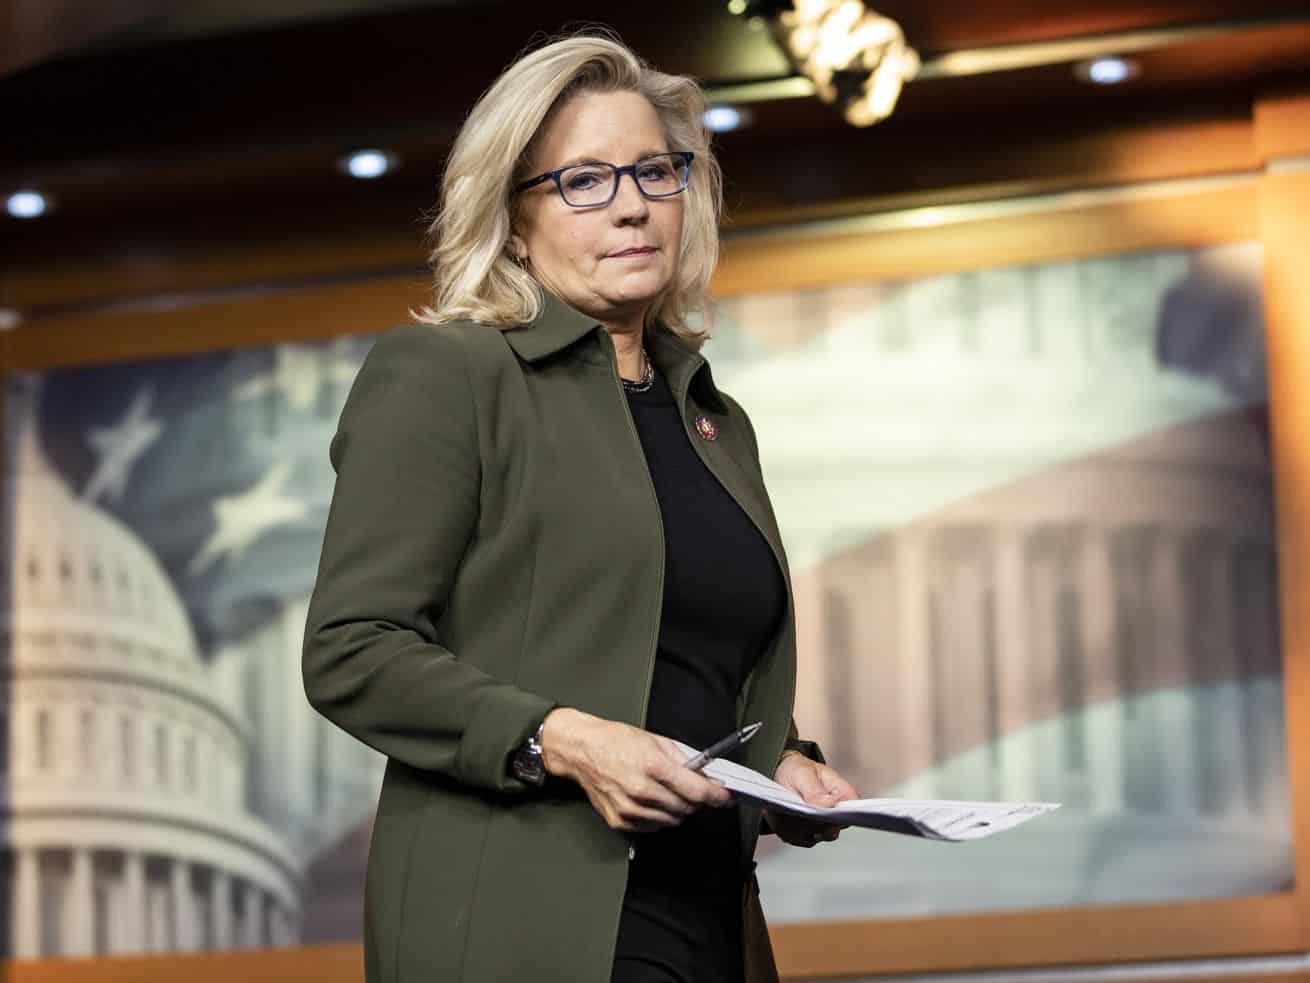 Liz Cheney asks Fox News viewers to reject Trump, after being censured by her state party